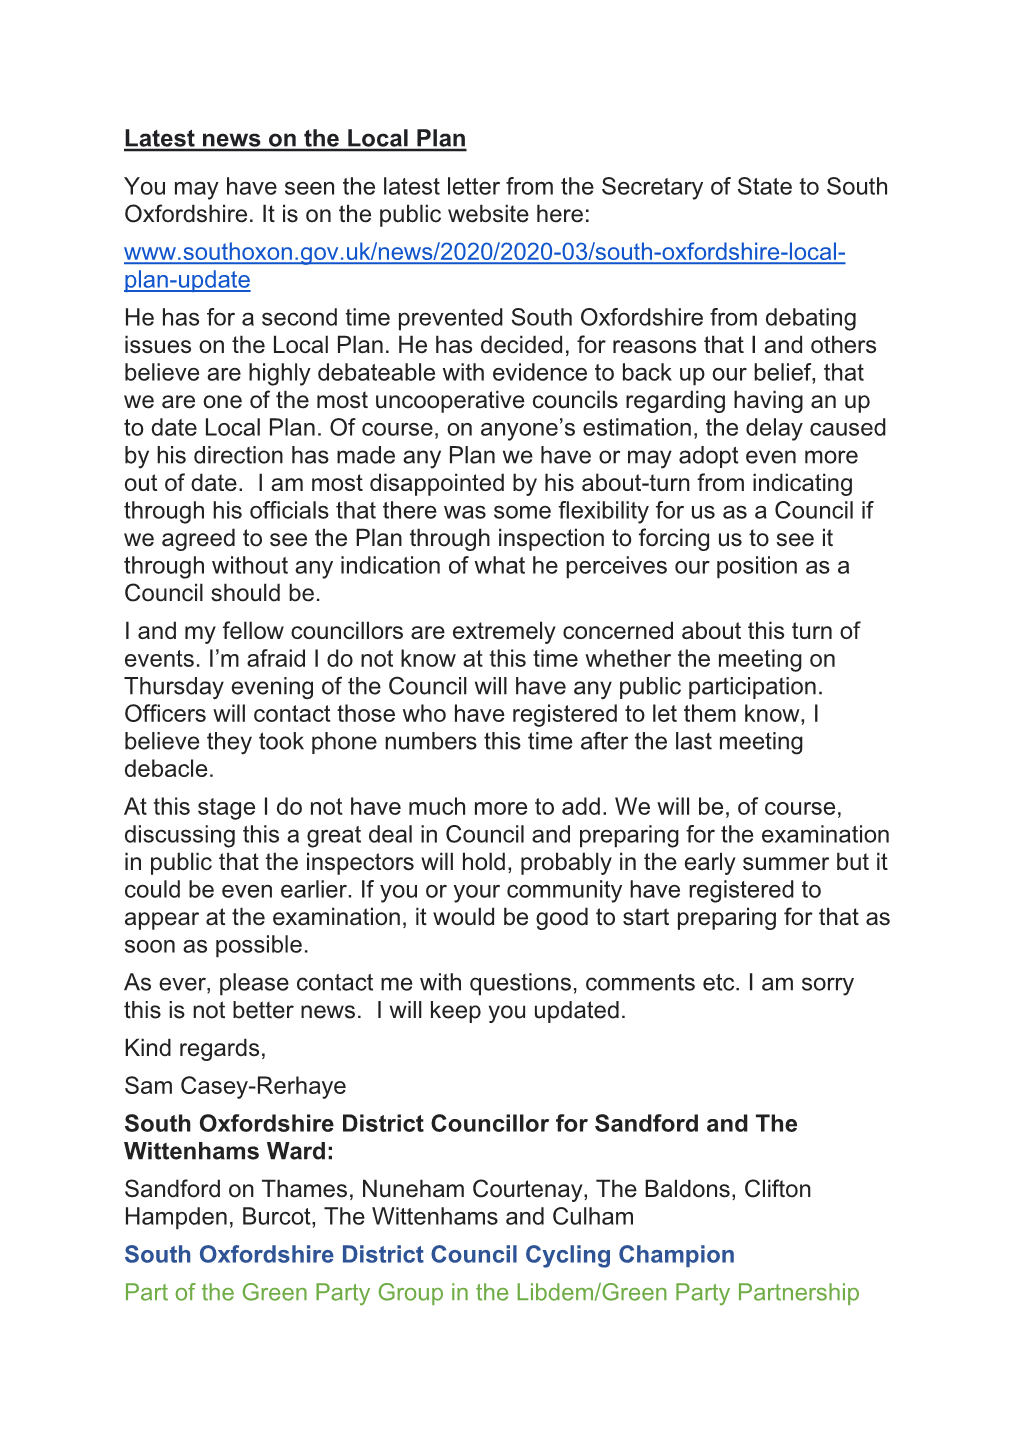 Latest News on the Local Plan You May Have Seen the Latest Letter From